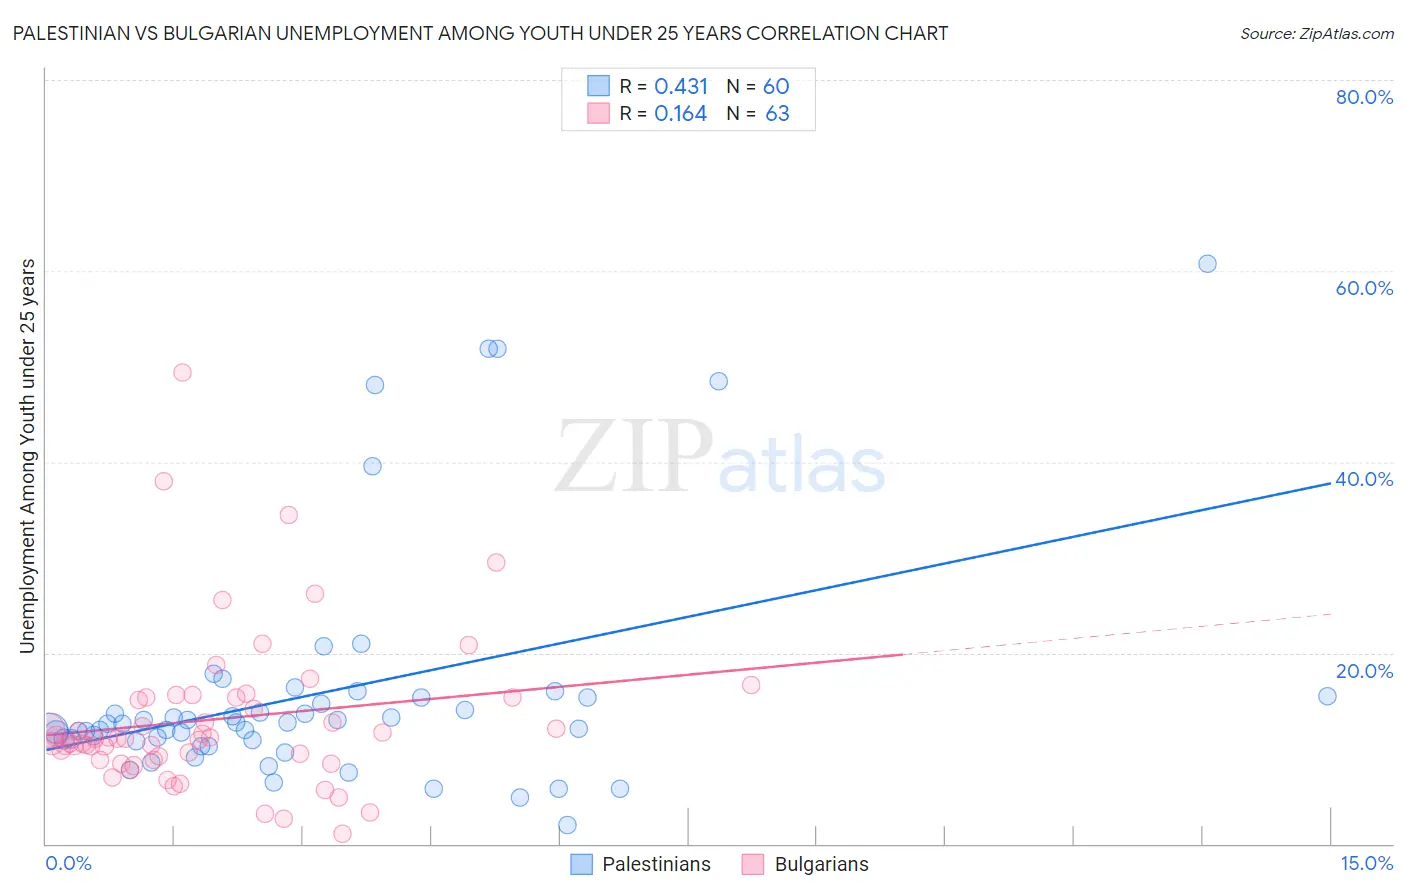 Palestinian vs Bulgarian Unemployment Among Youth under 25 years